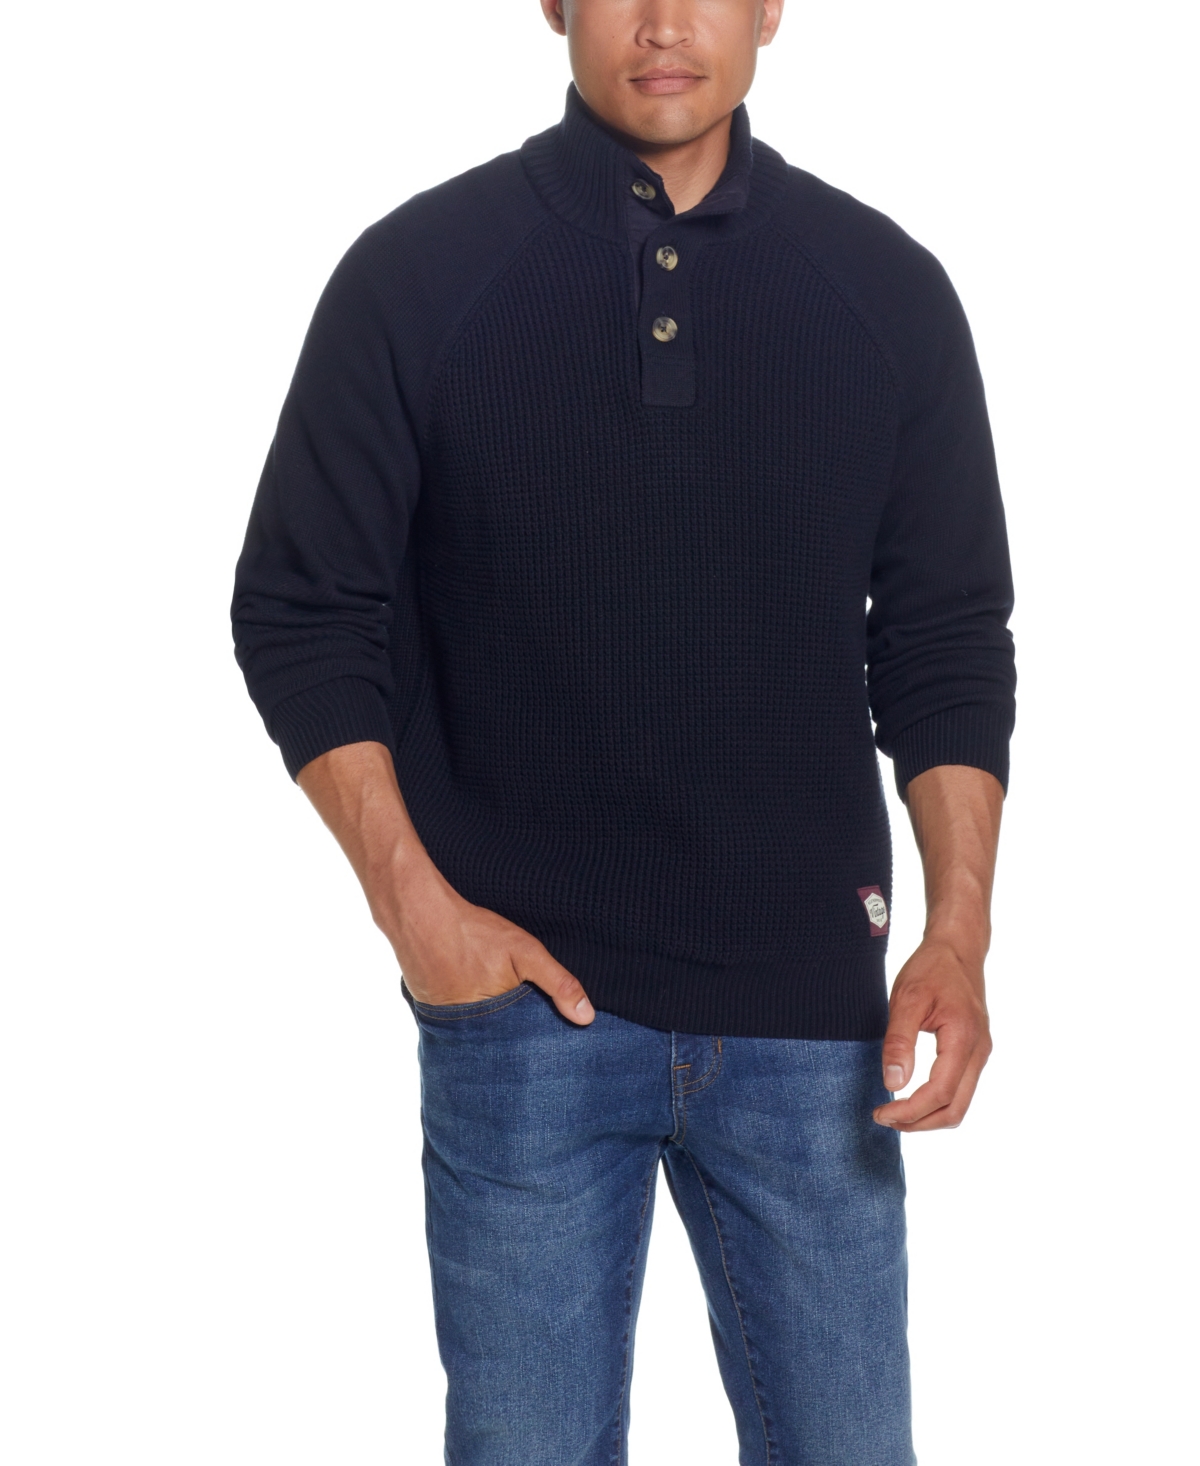 Men's Button Mock Neck Sweater - Charcoal Heather